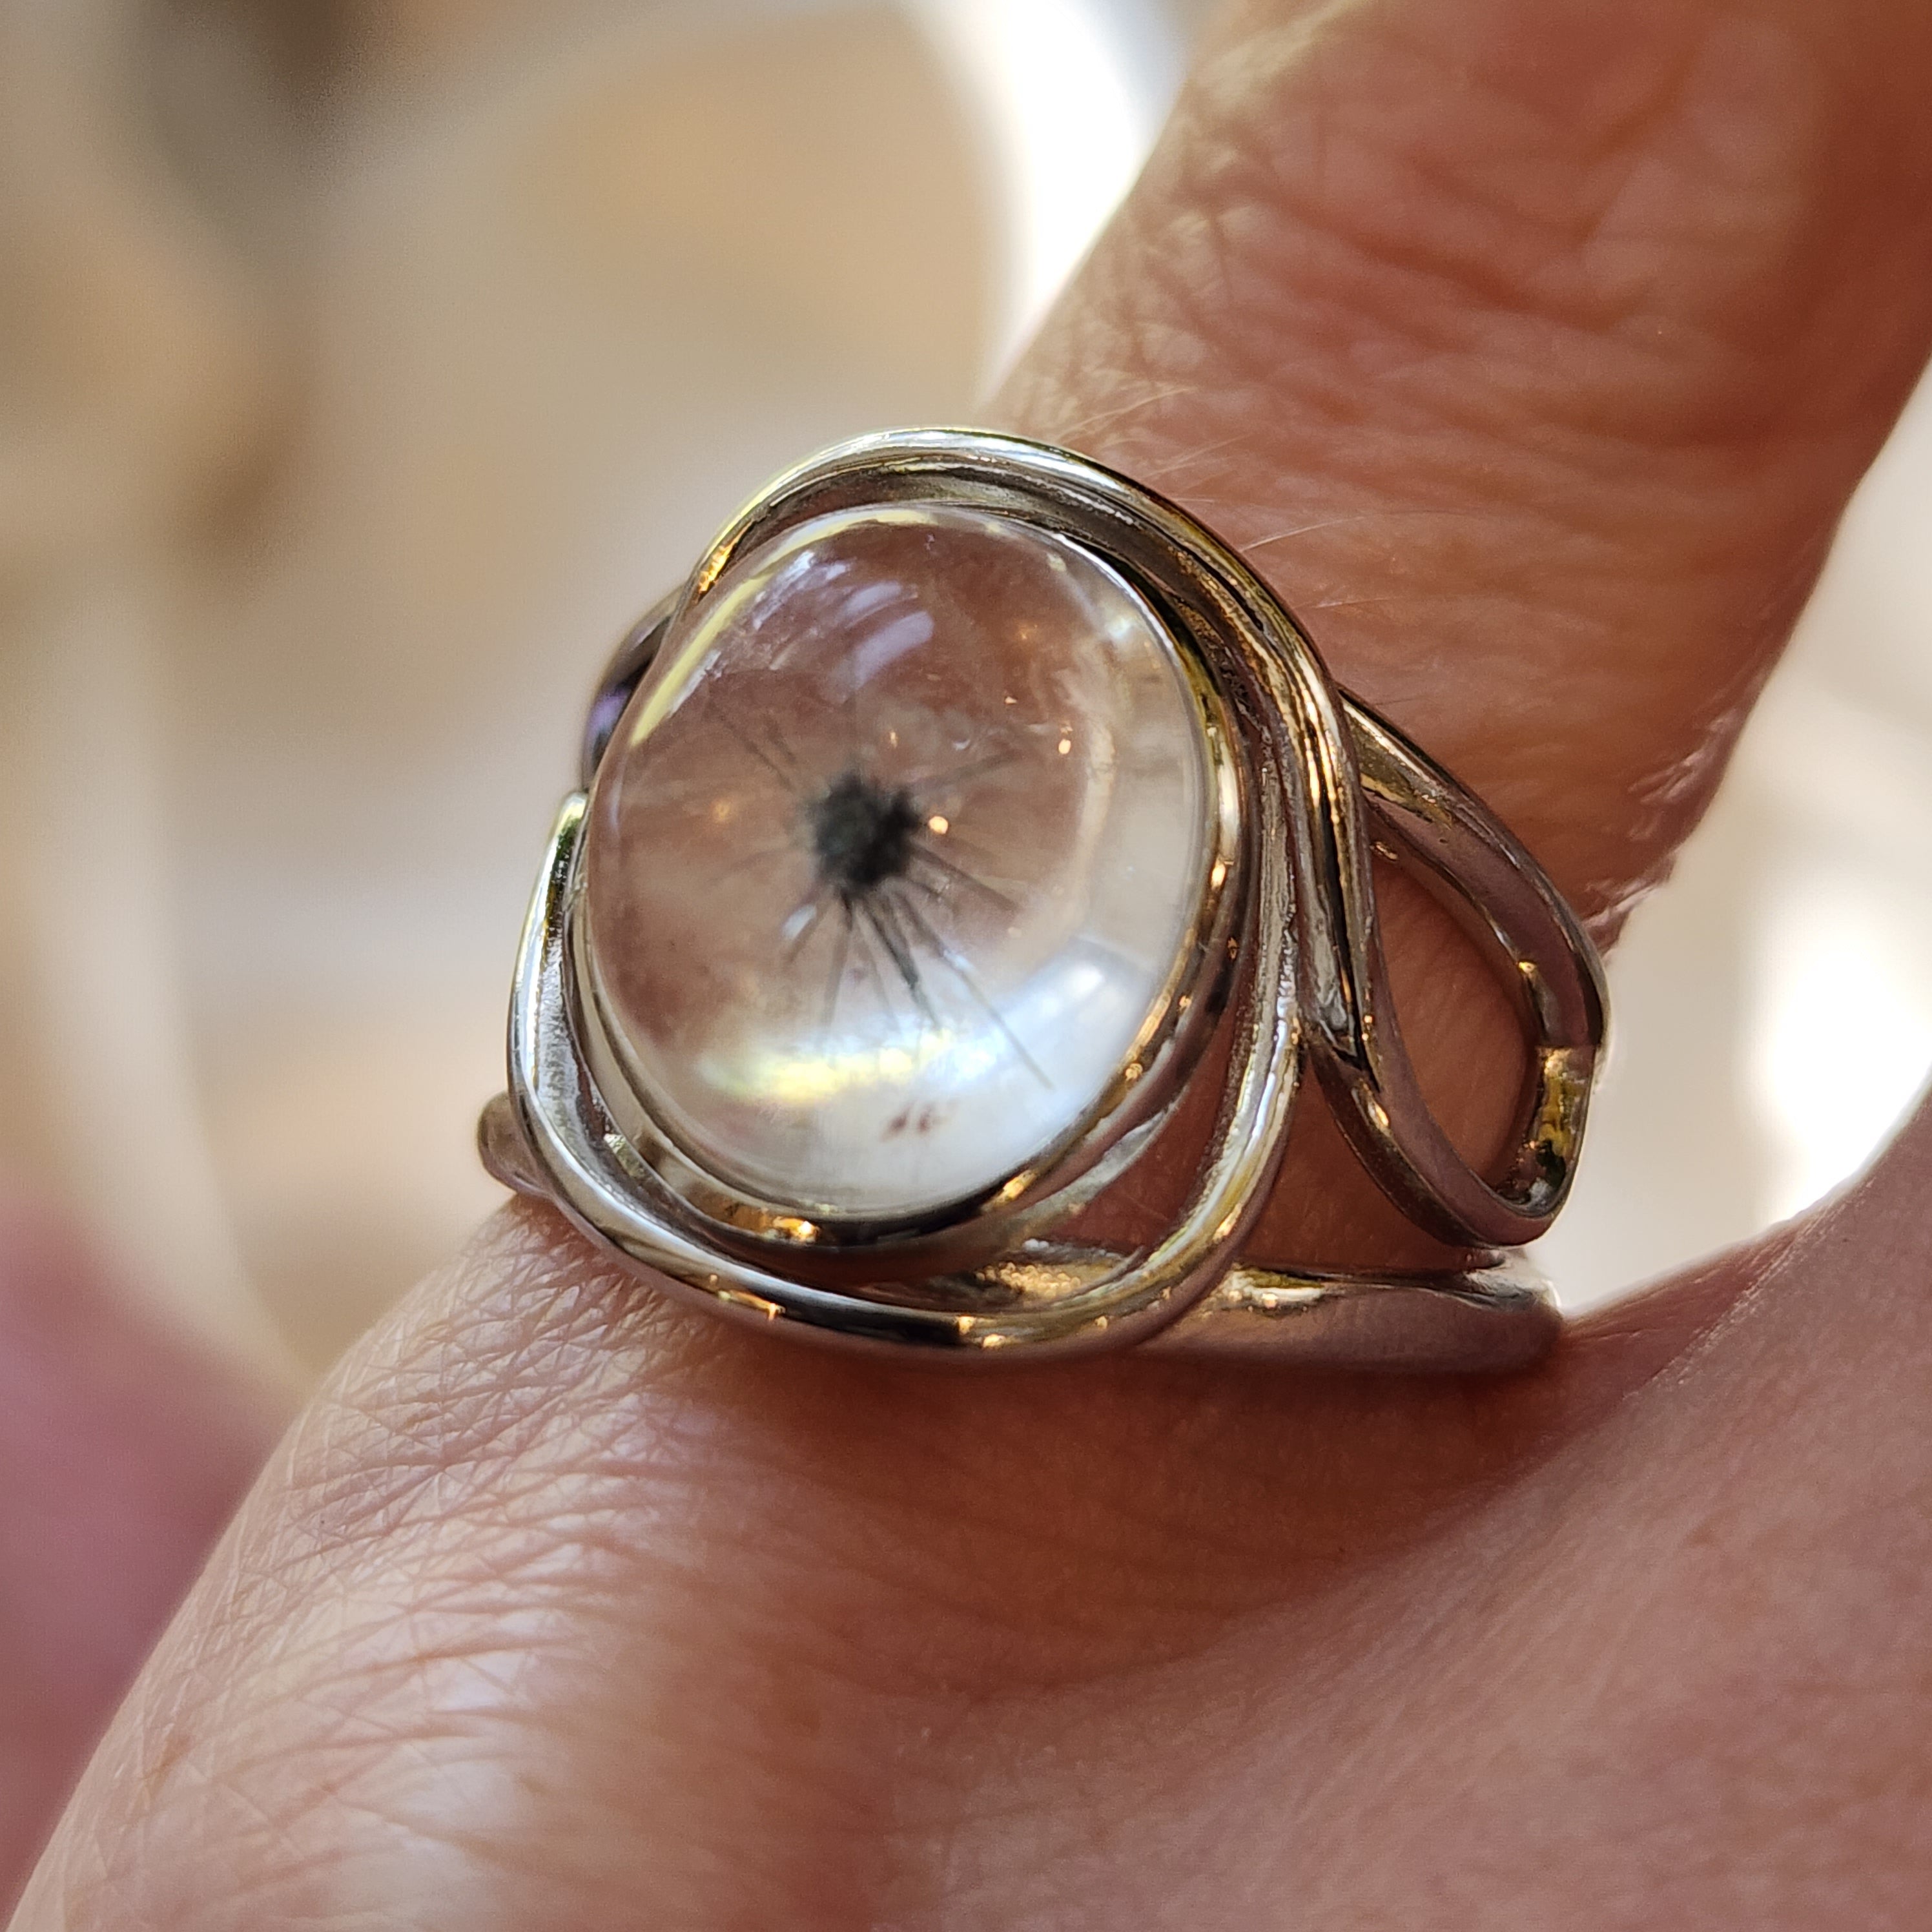 Hollandite in Quartz Finger Cuff Adjustable Ring .925 Silver for Finding your Destiny, Hope and Connecting with your Higher Self